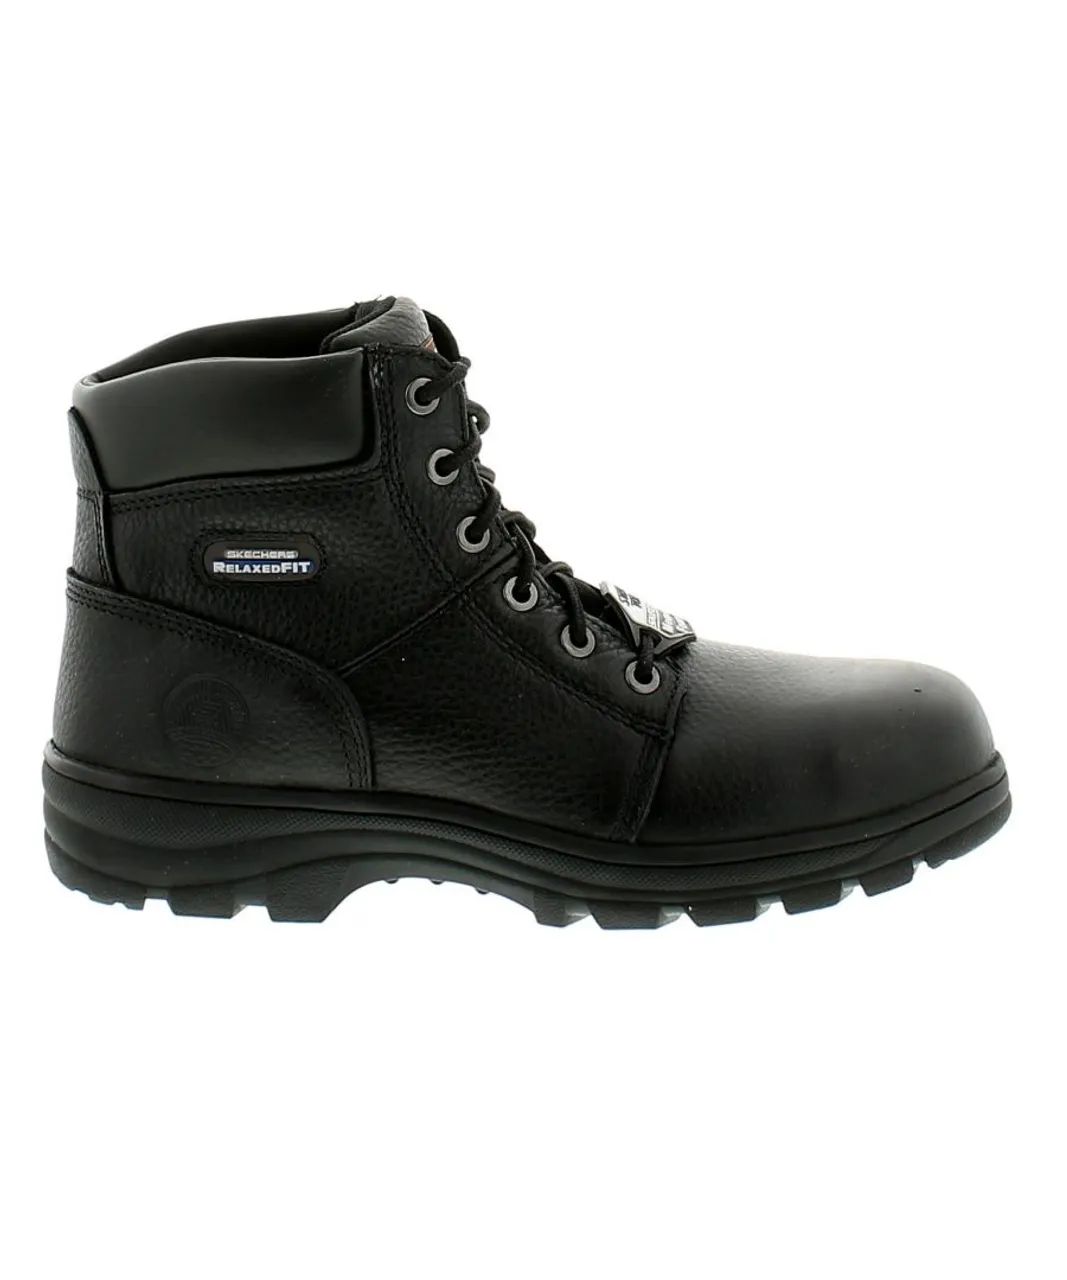 Skechers Workshire Mens Leather Safety Boots Black